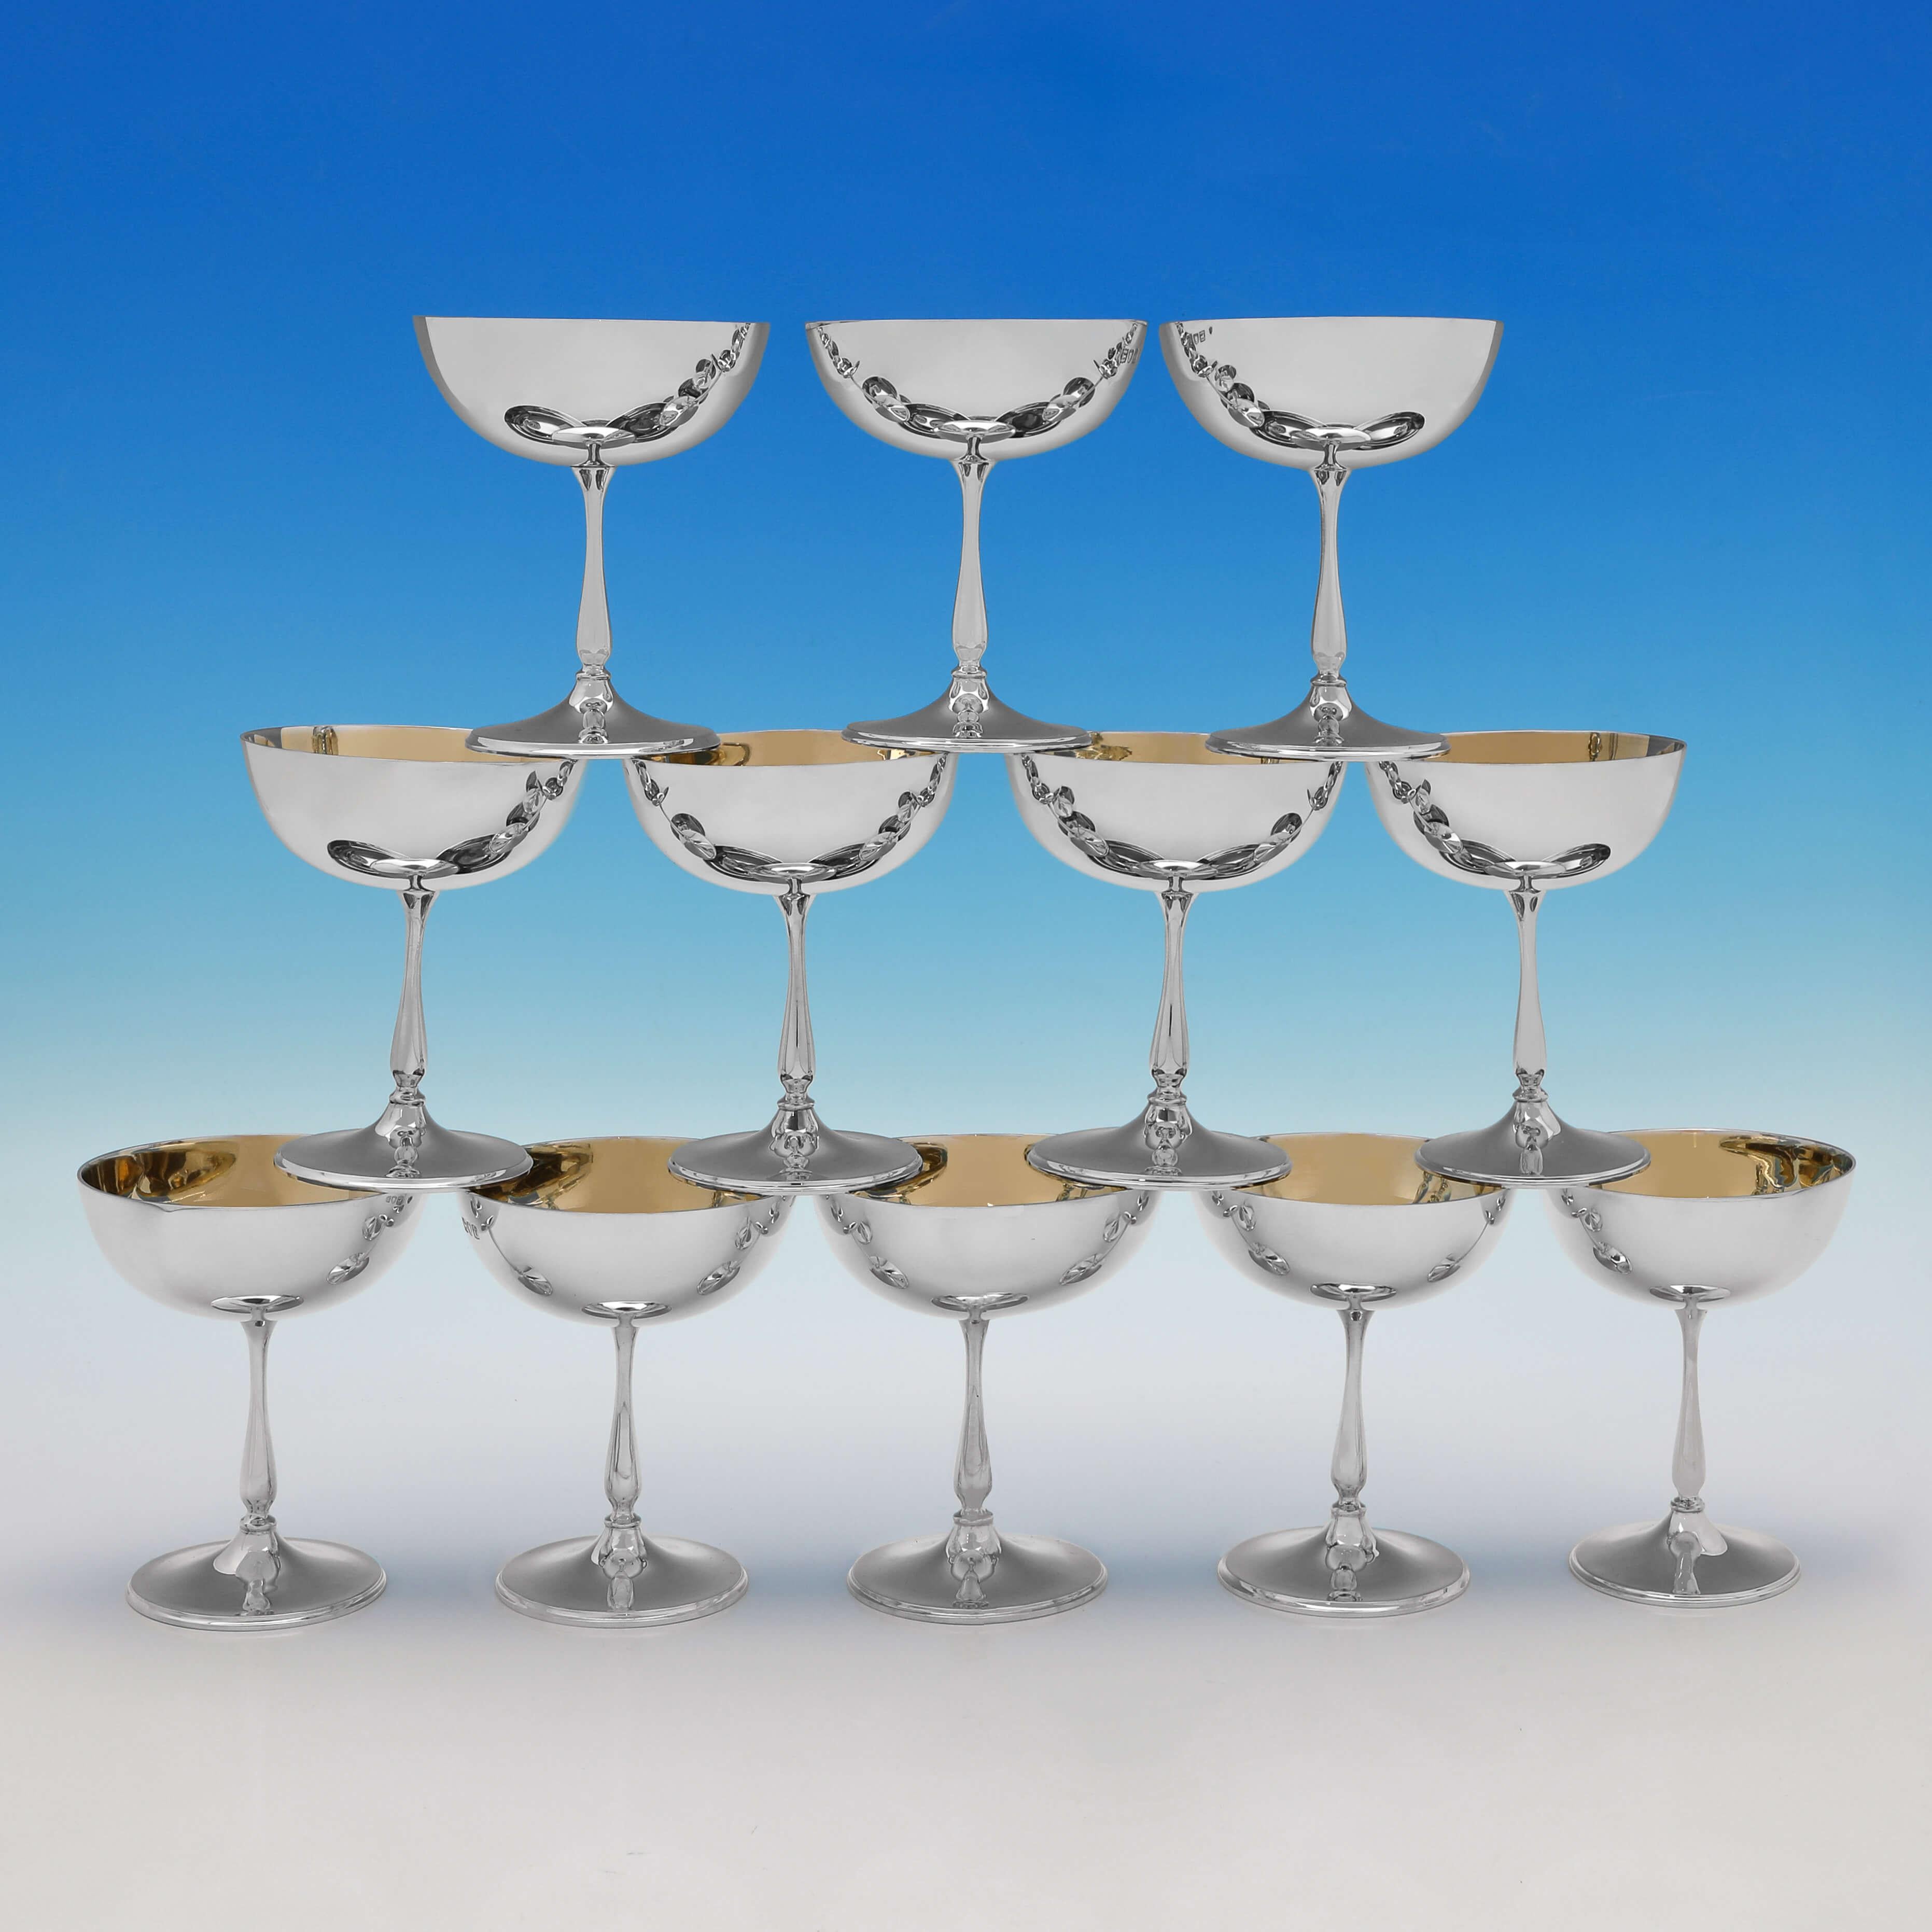 Hallmarked in London in 1901/5 by Edward Barnard & Sons, this very handsome set of 12 Antique Sterling Silver Champagne Coupes, are presented in their original box, and are plain in design with gilt interiors. Each champagne coupe measures